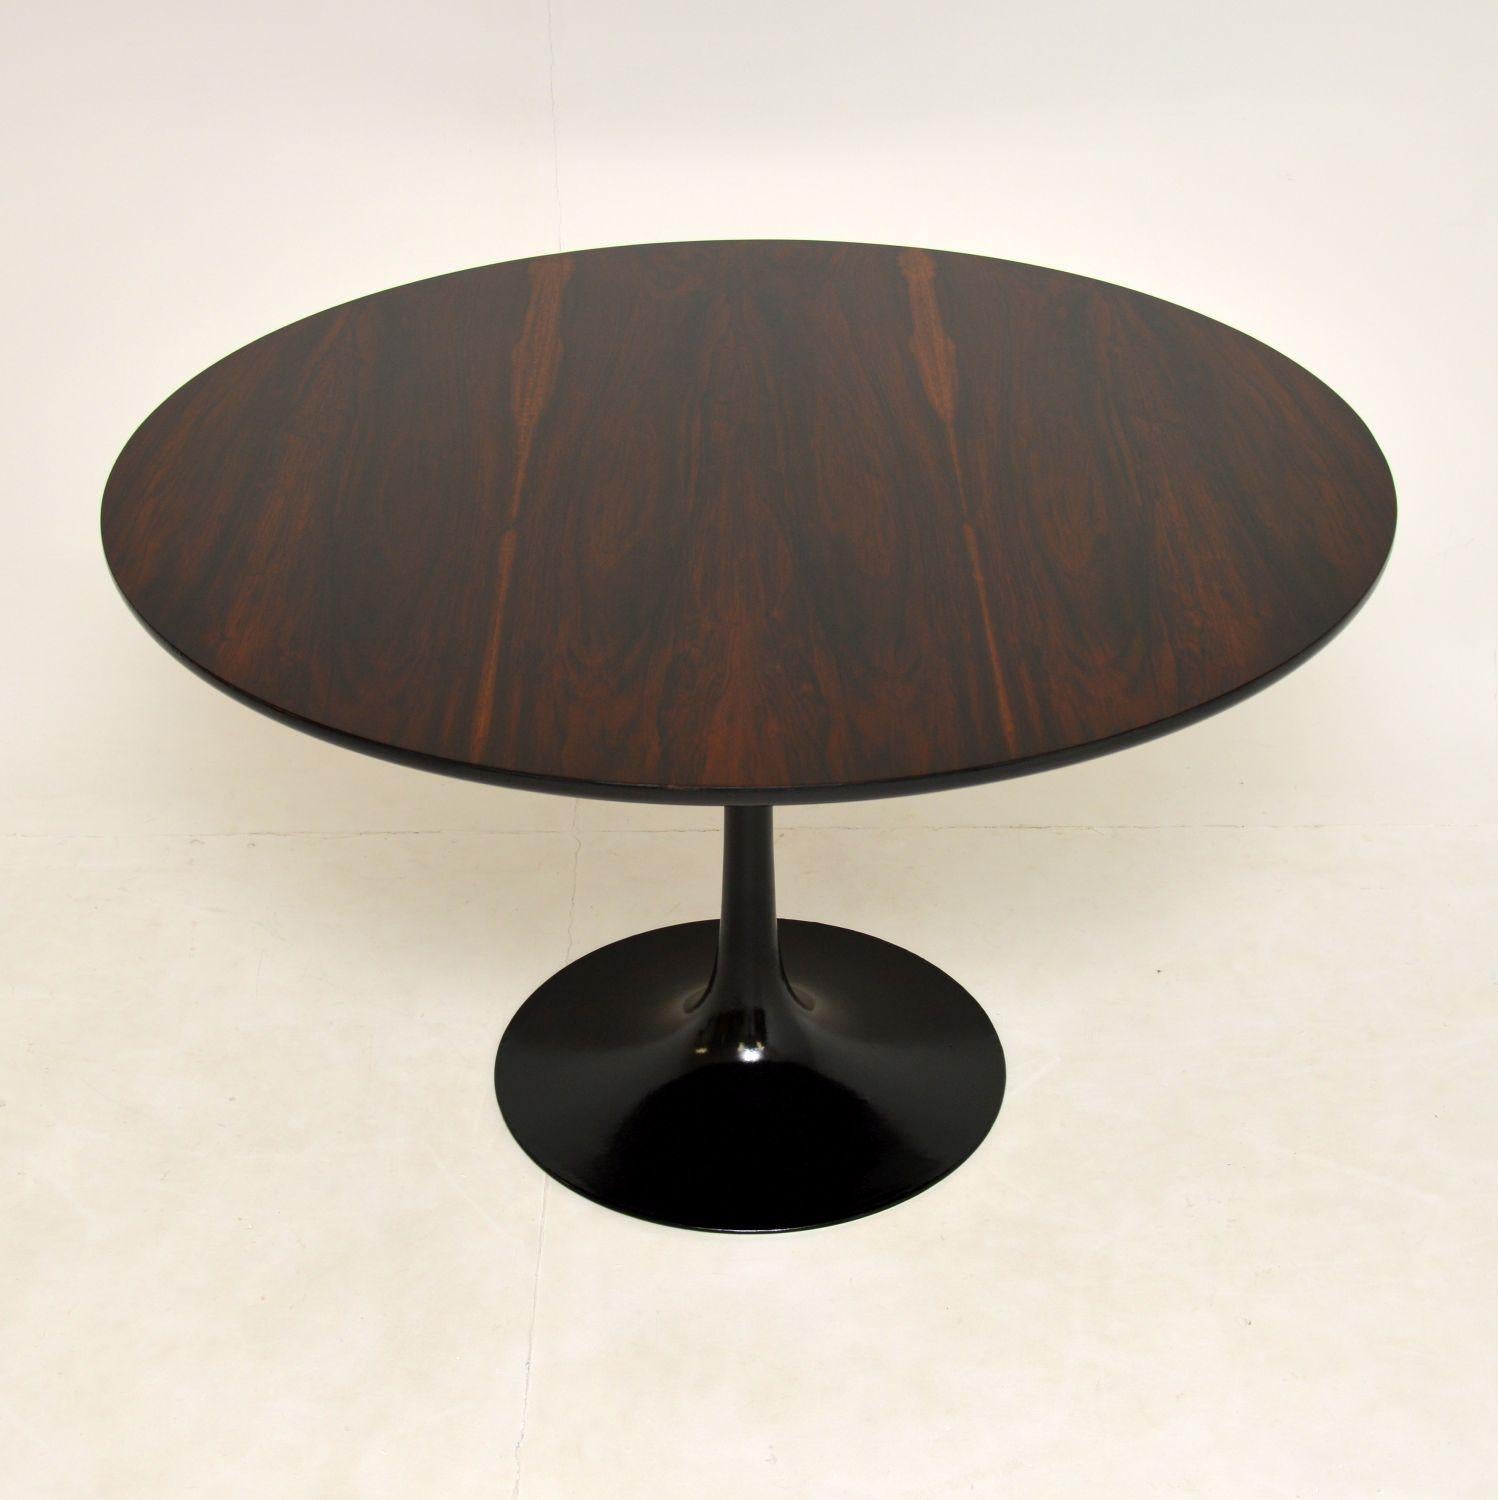 A stunning and very rare vintage dining table, designed by Maurice Burke for Arkana. This was made in England, it dates from the 1960’s.

This rare version has a stunning circular wood top, and we have just had the base ebonised.

The top has